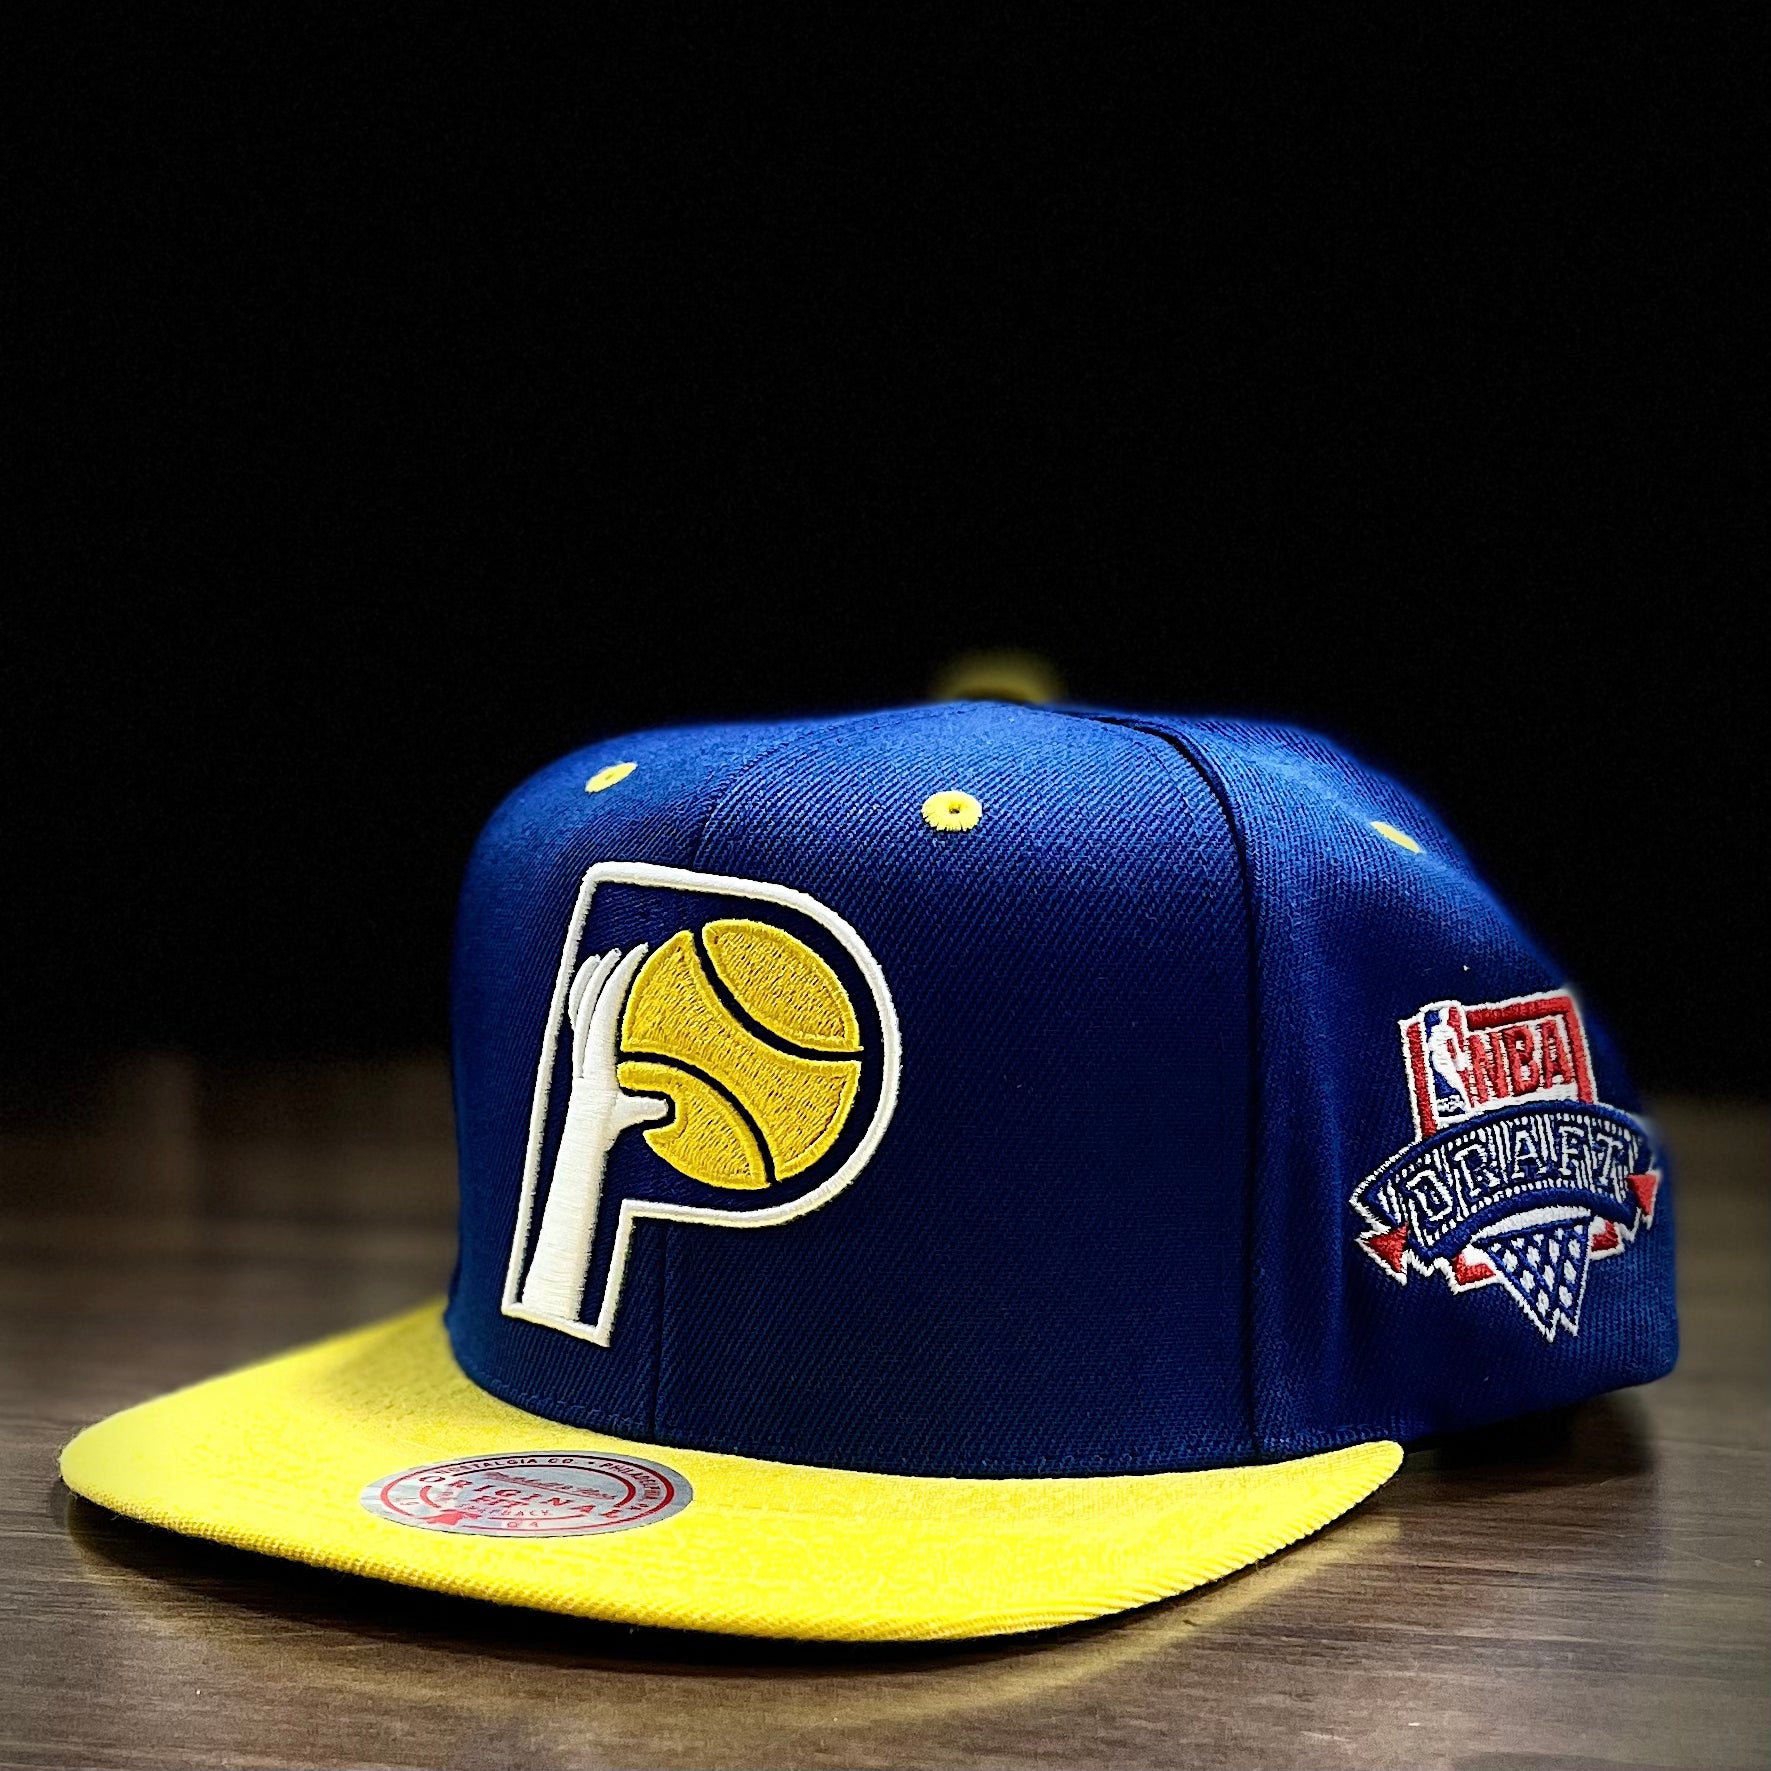 Indiana Pacers Mitchell & Ness Hardwood Classics Core Side Snapback Hat -  Navy/Gold